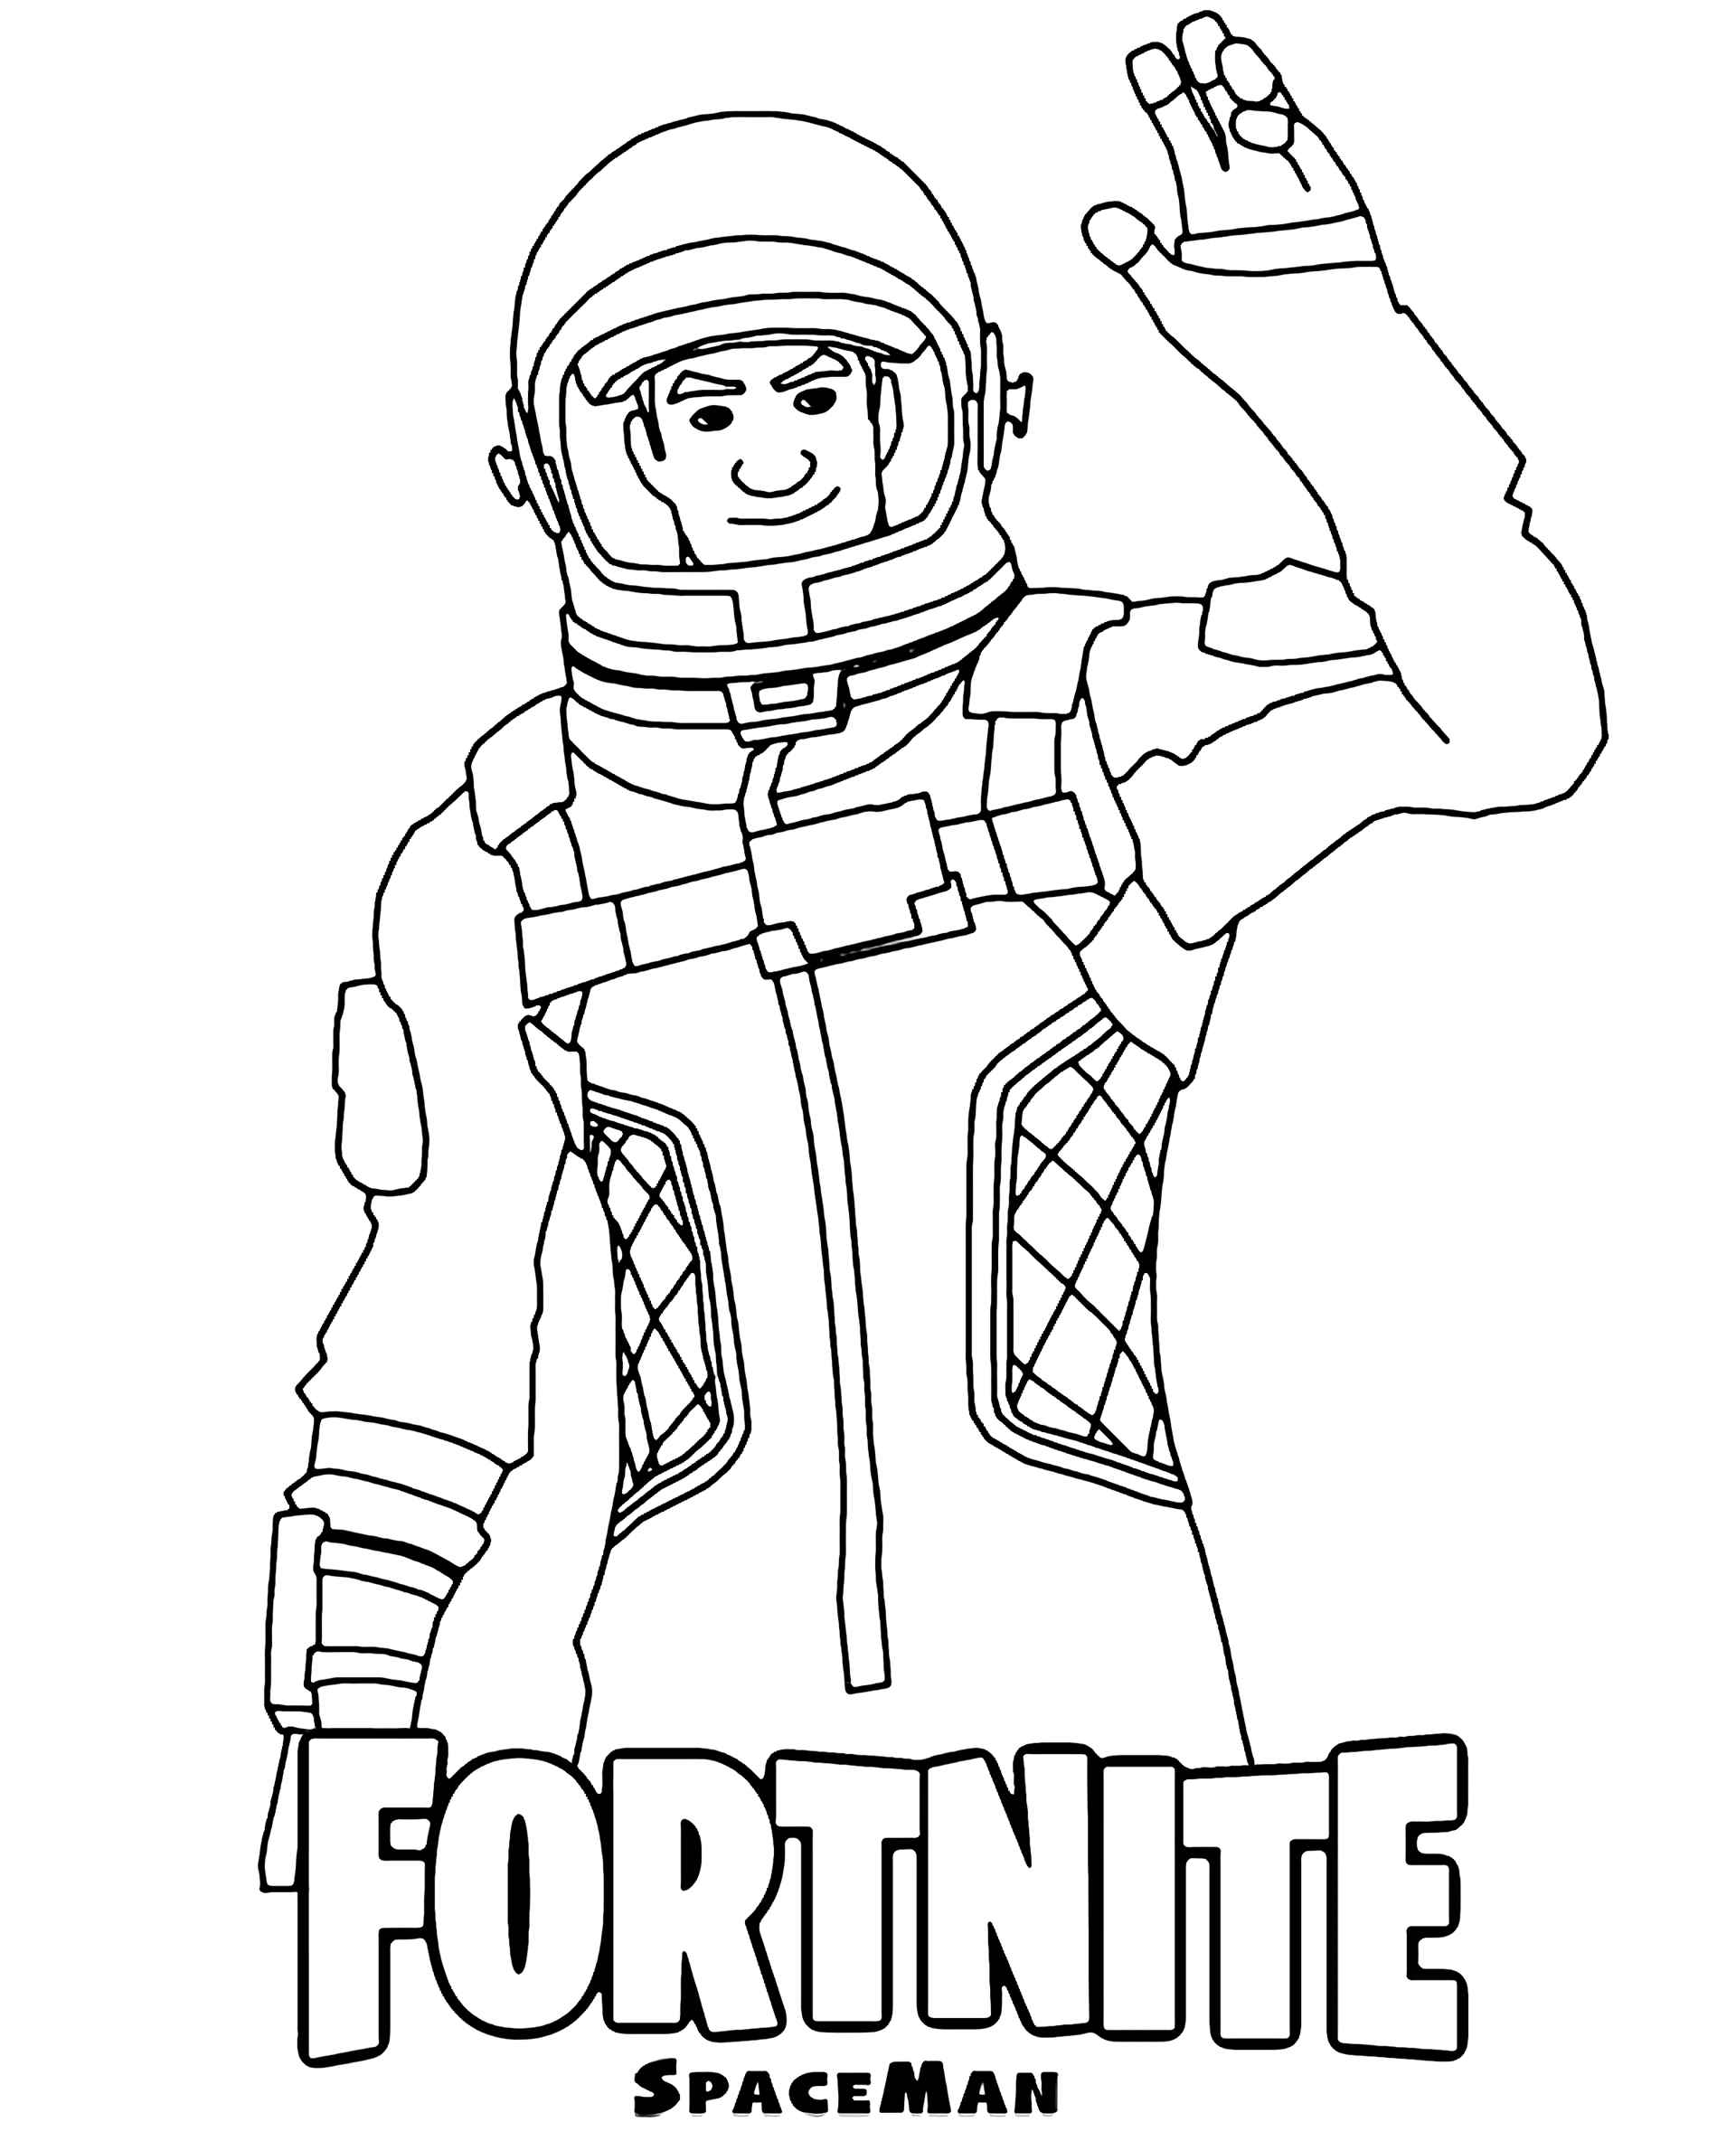 Coloring Page Spaceman Greets You In Fortnite To Print And Download ...